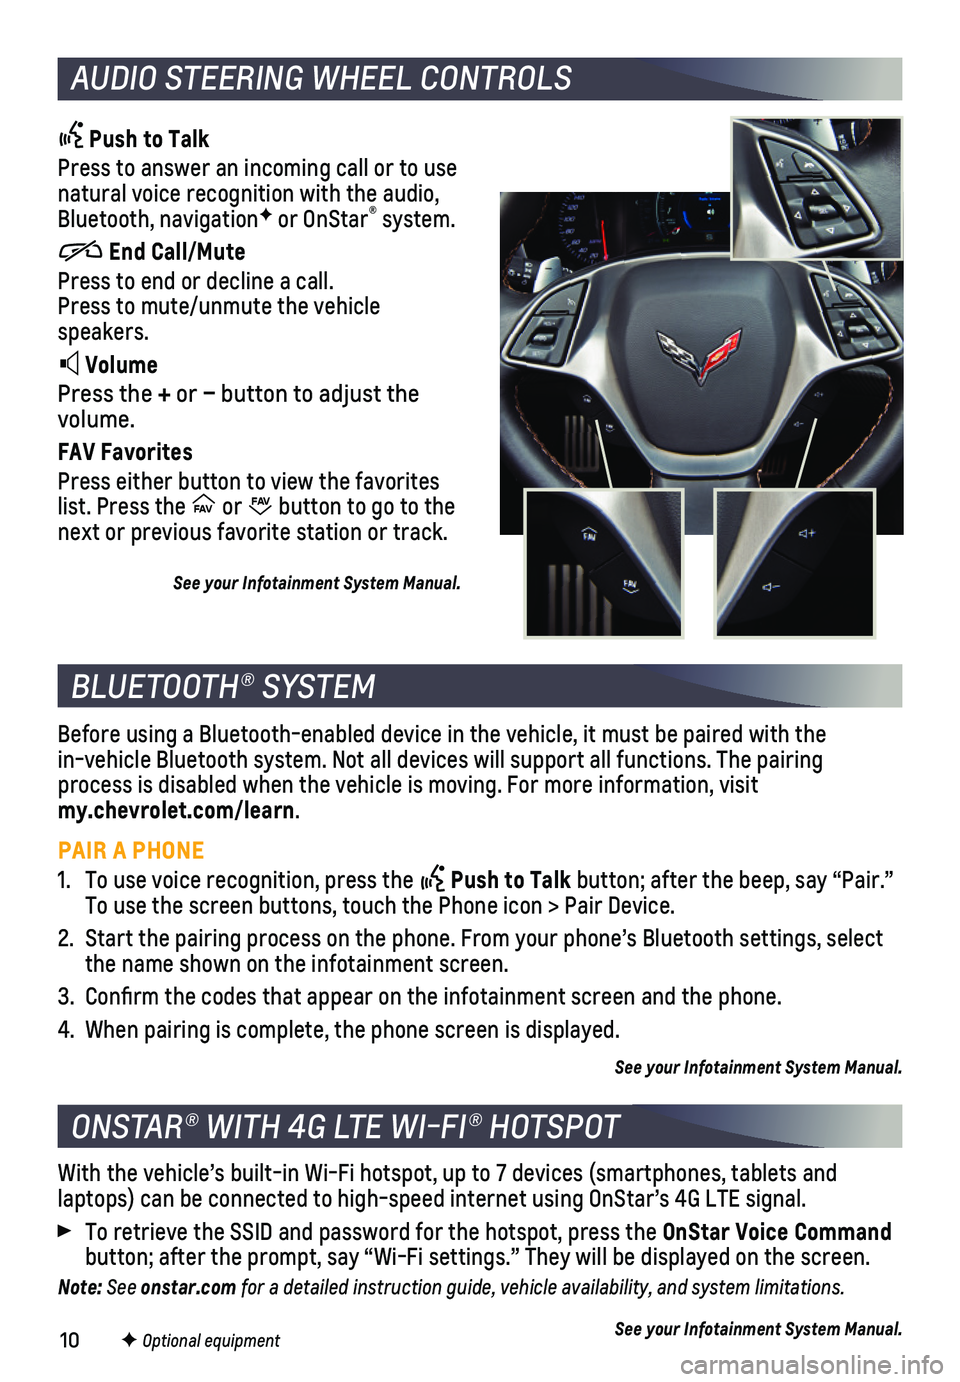 CHEVROLET CORVETTE 2019  Get To Know Guide 10
AUDIO STEERING WHEEL CONTROLS
 Push to Talk
Press to answer an incoming call or to use natural voice recognition with the audio, Bluetooth, navigationF or OnStar® system.
          End Call/Mute
P